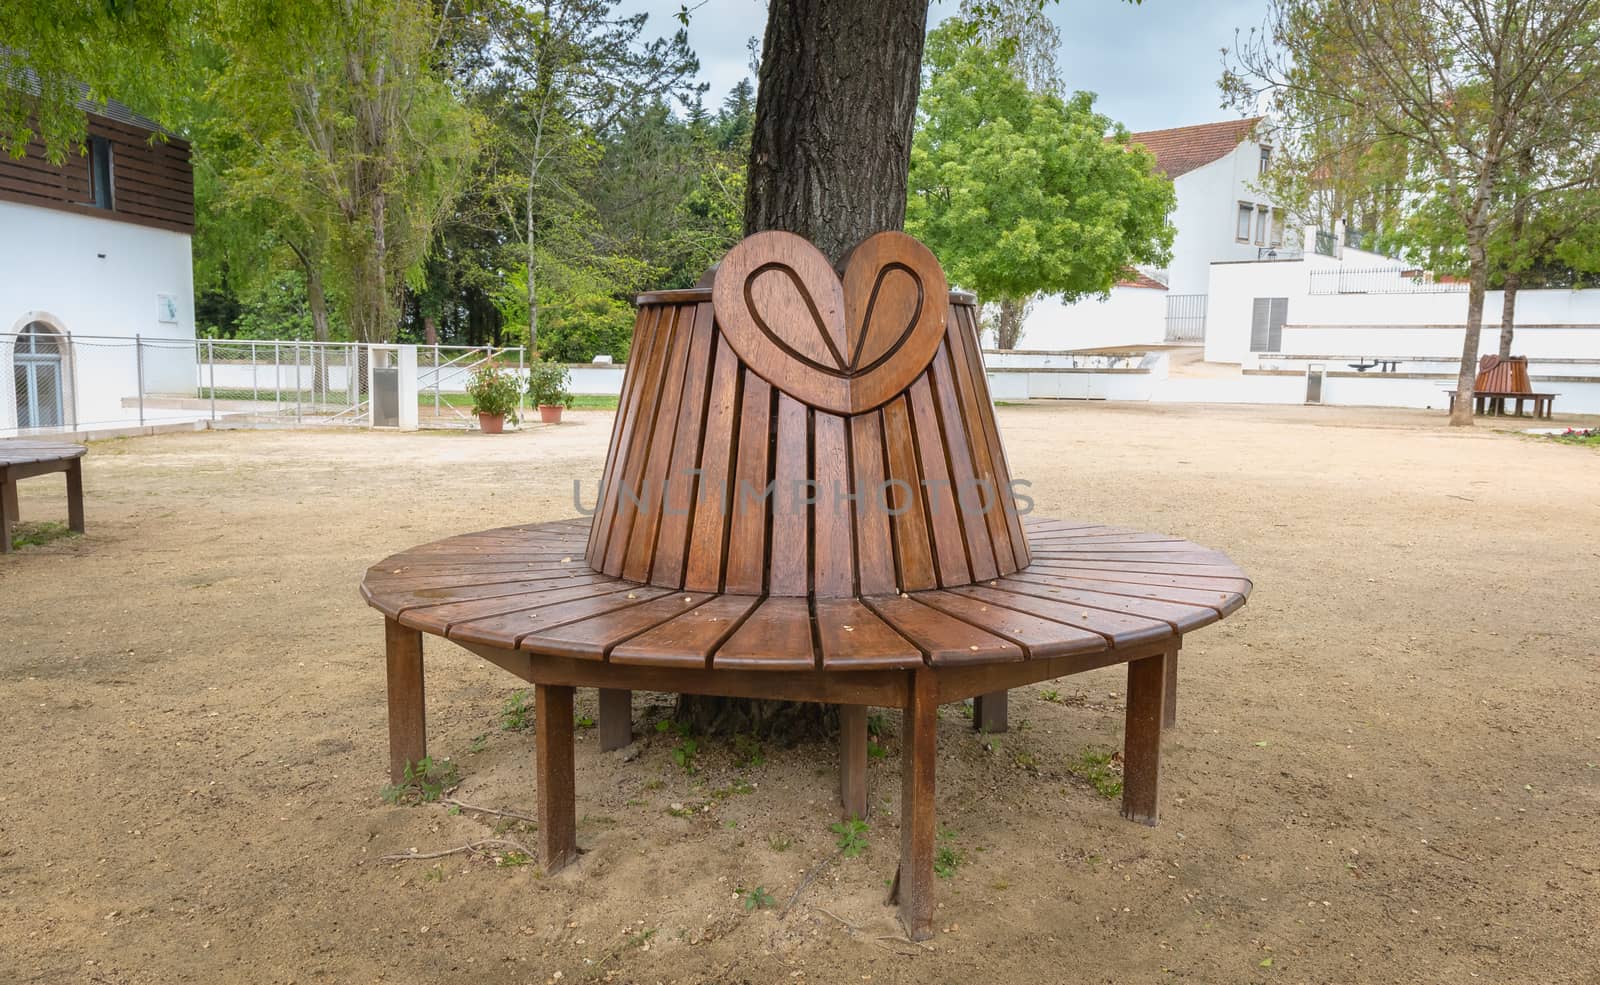 detail view on the heart decorated benches of the garden of love by AtlanticEUROSTOXX